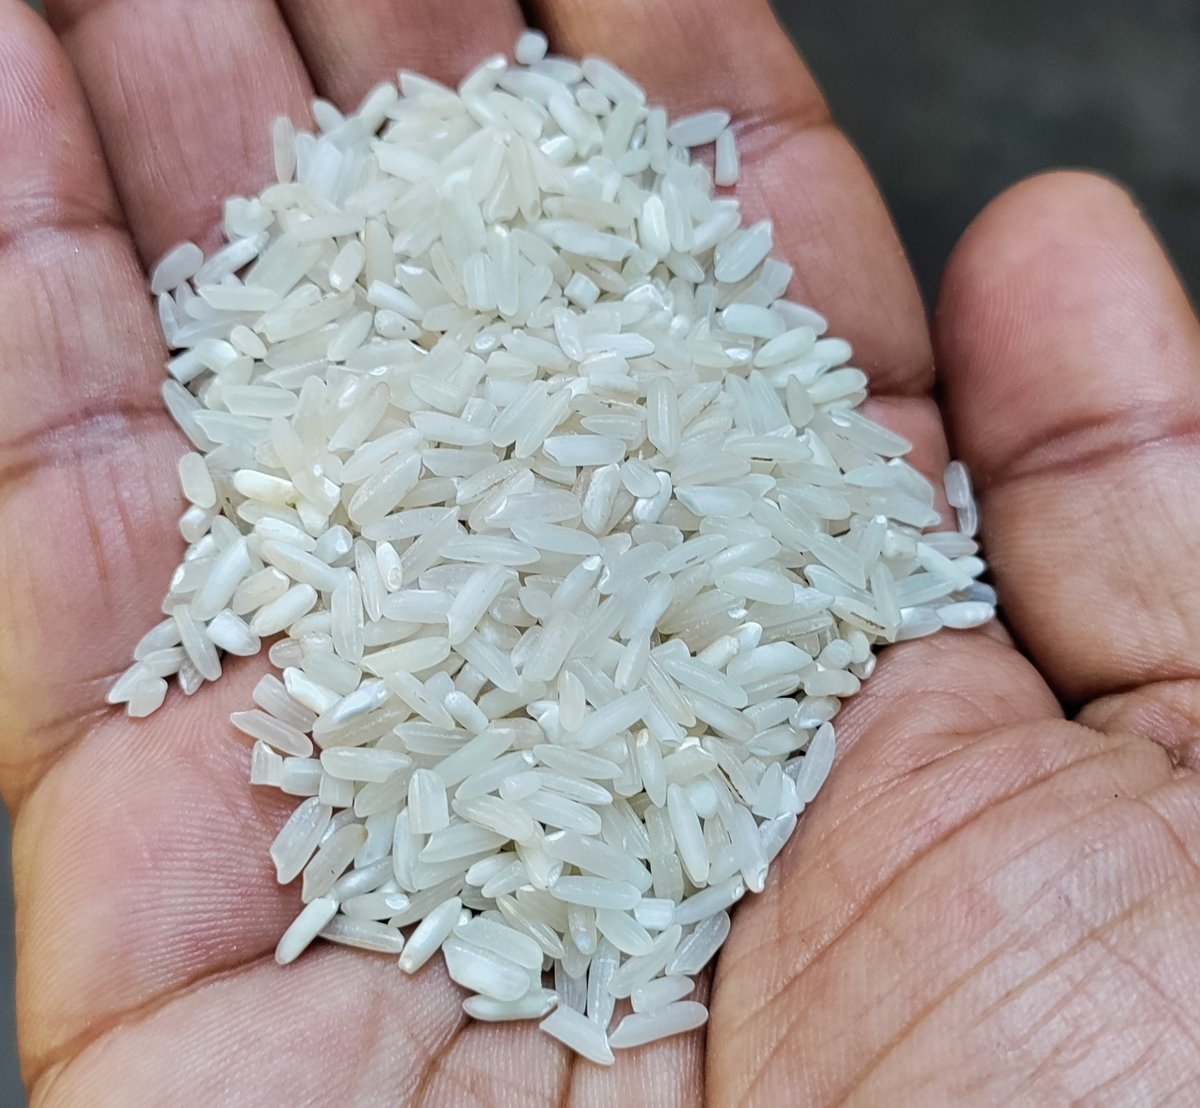 Tried #BharatRice in my relatives house yesterday at Cuddalore. 👌Quality. Kudos to the @narendramodi ji govt for introducing this. ₹290 for 10kgs. Its unpolished. The good part is, It's reaching the rural areas too.